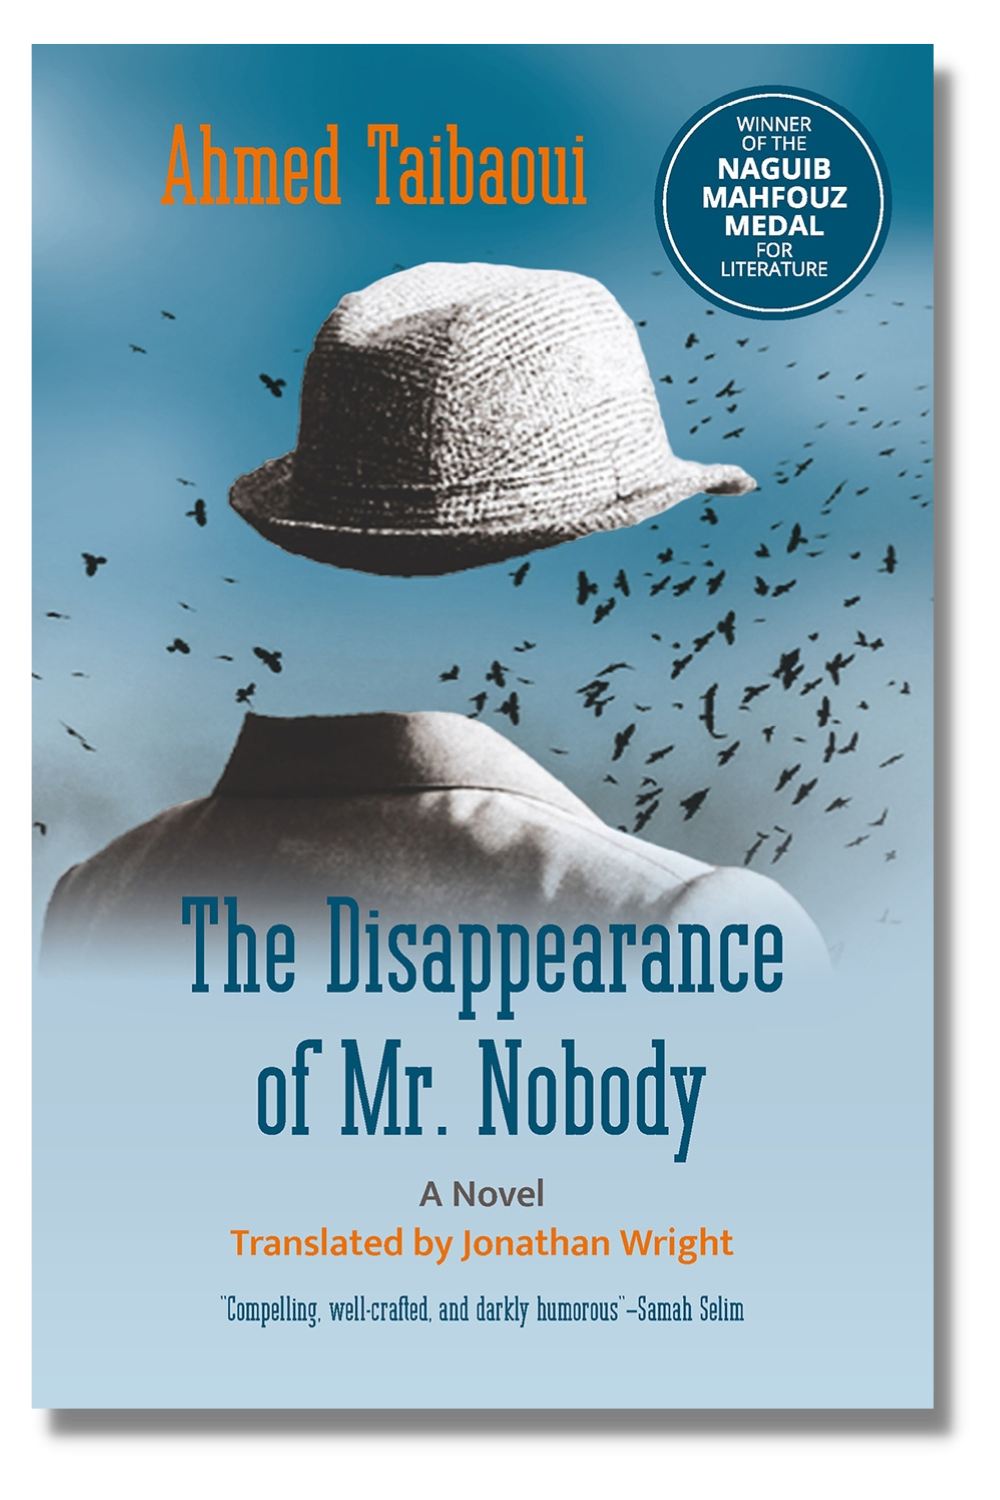 The cover of "The Disappearance of Mr. Nobody"